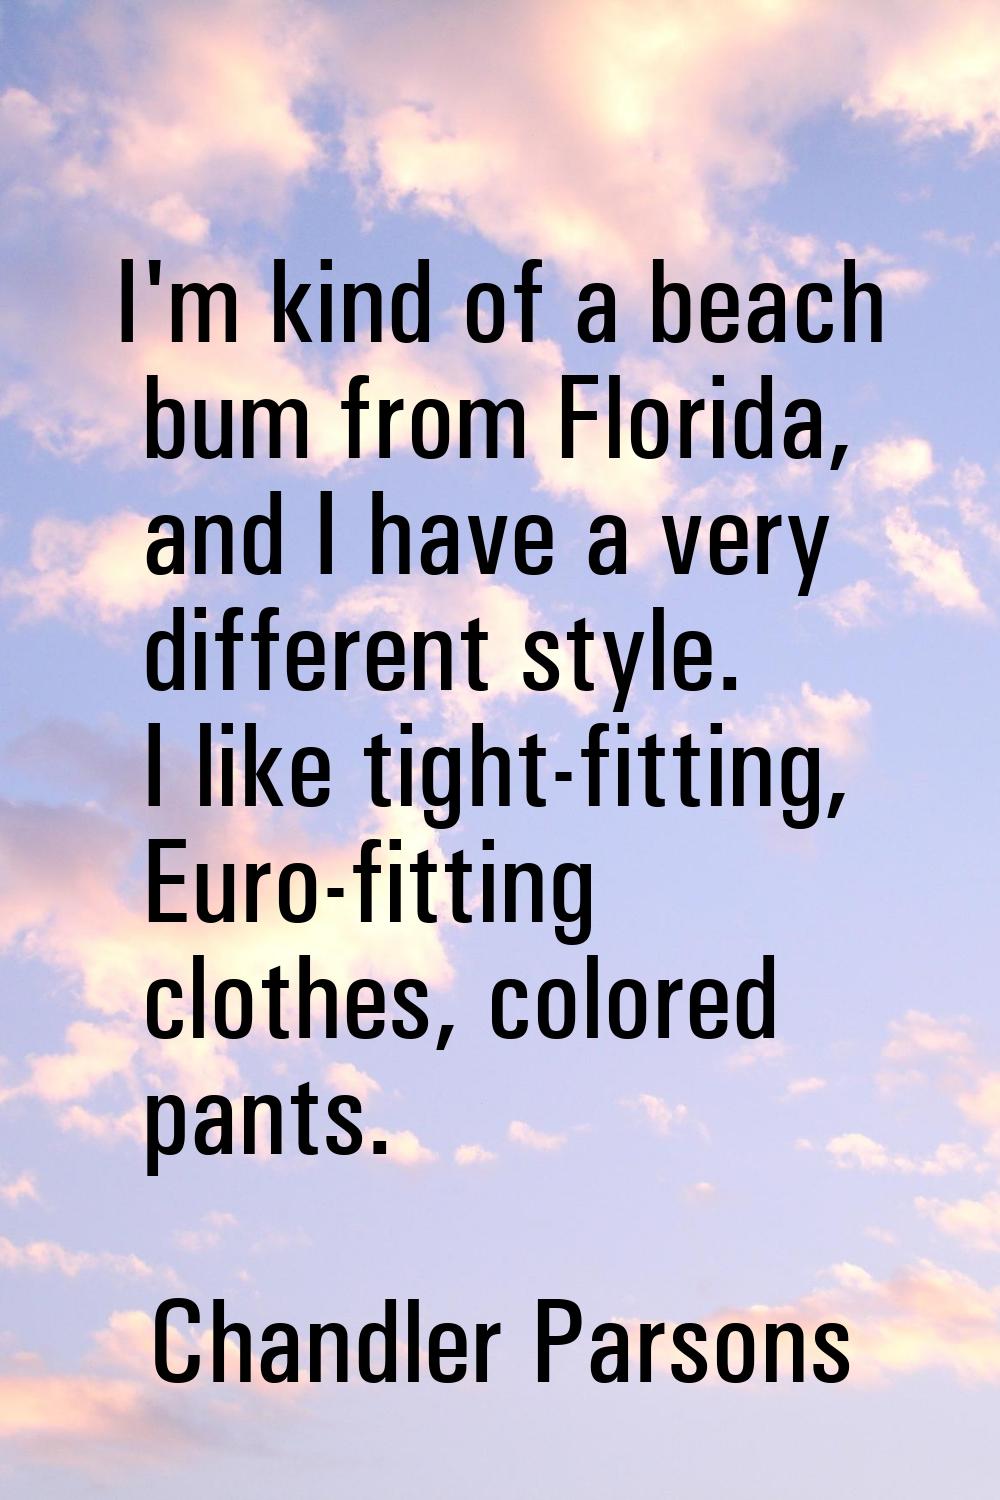 I'm kind of a beach bum from Florida, and I have a very different style. I like tight-fitting, Euro